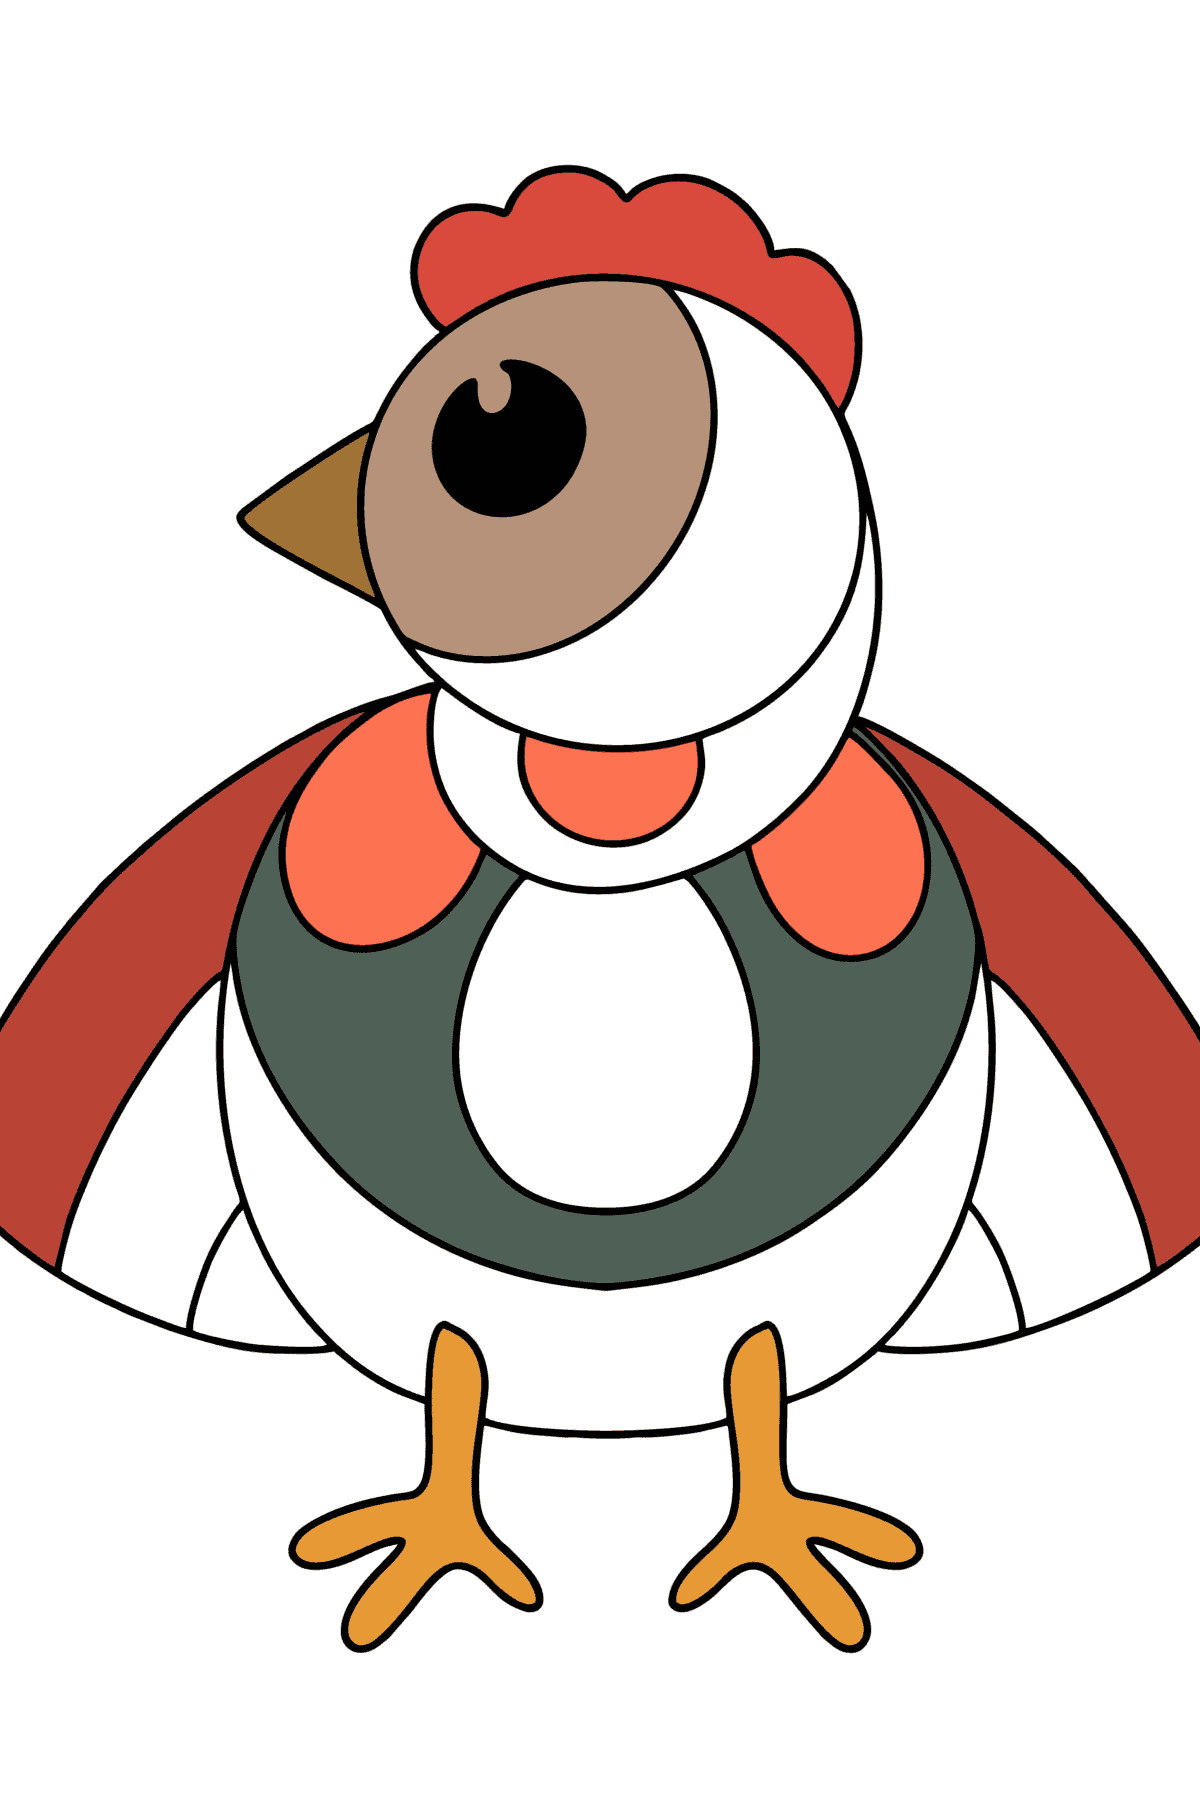 Chicken Anti stress coloring page - Coloring Pages for Kids